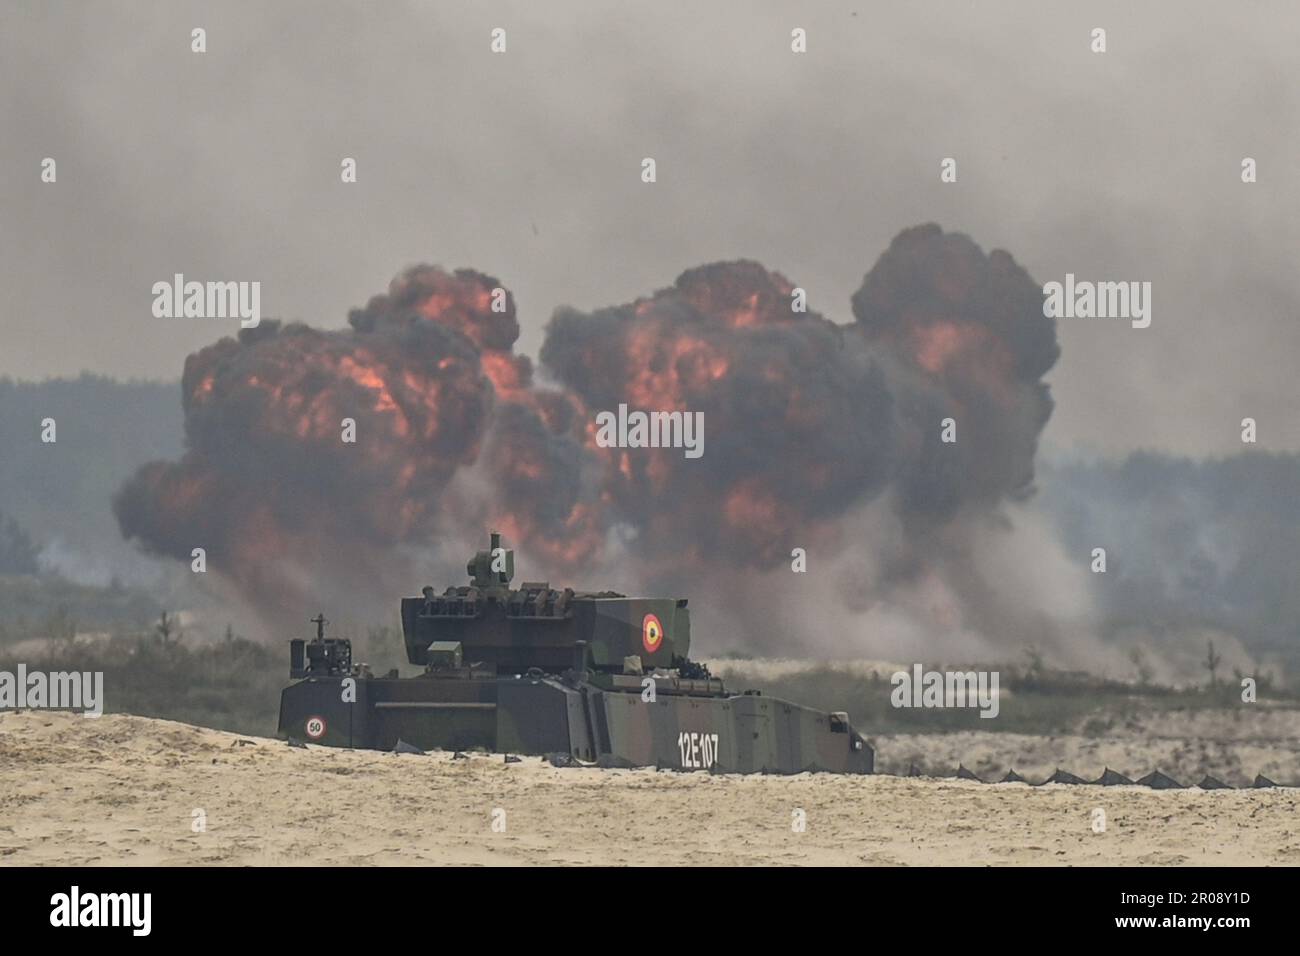 Romanian Army Piranha V Infantry Fighting Vehicle seen during a high-intensity ANACONDA-23 training session at the Nowa Deba training ground, Poland. Credit: ASWphoto/Alamy Live News Stock Photo